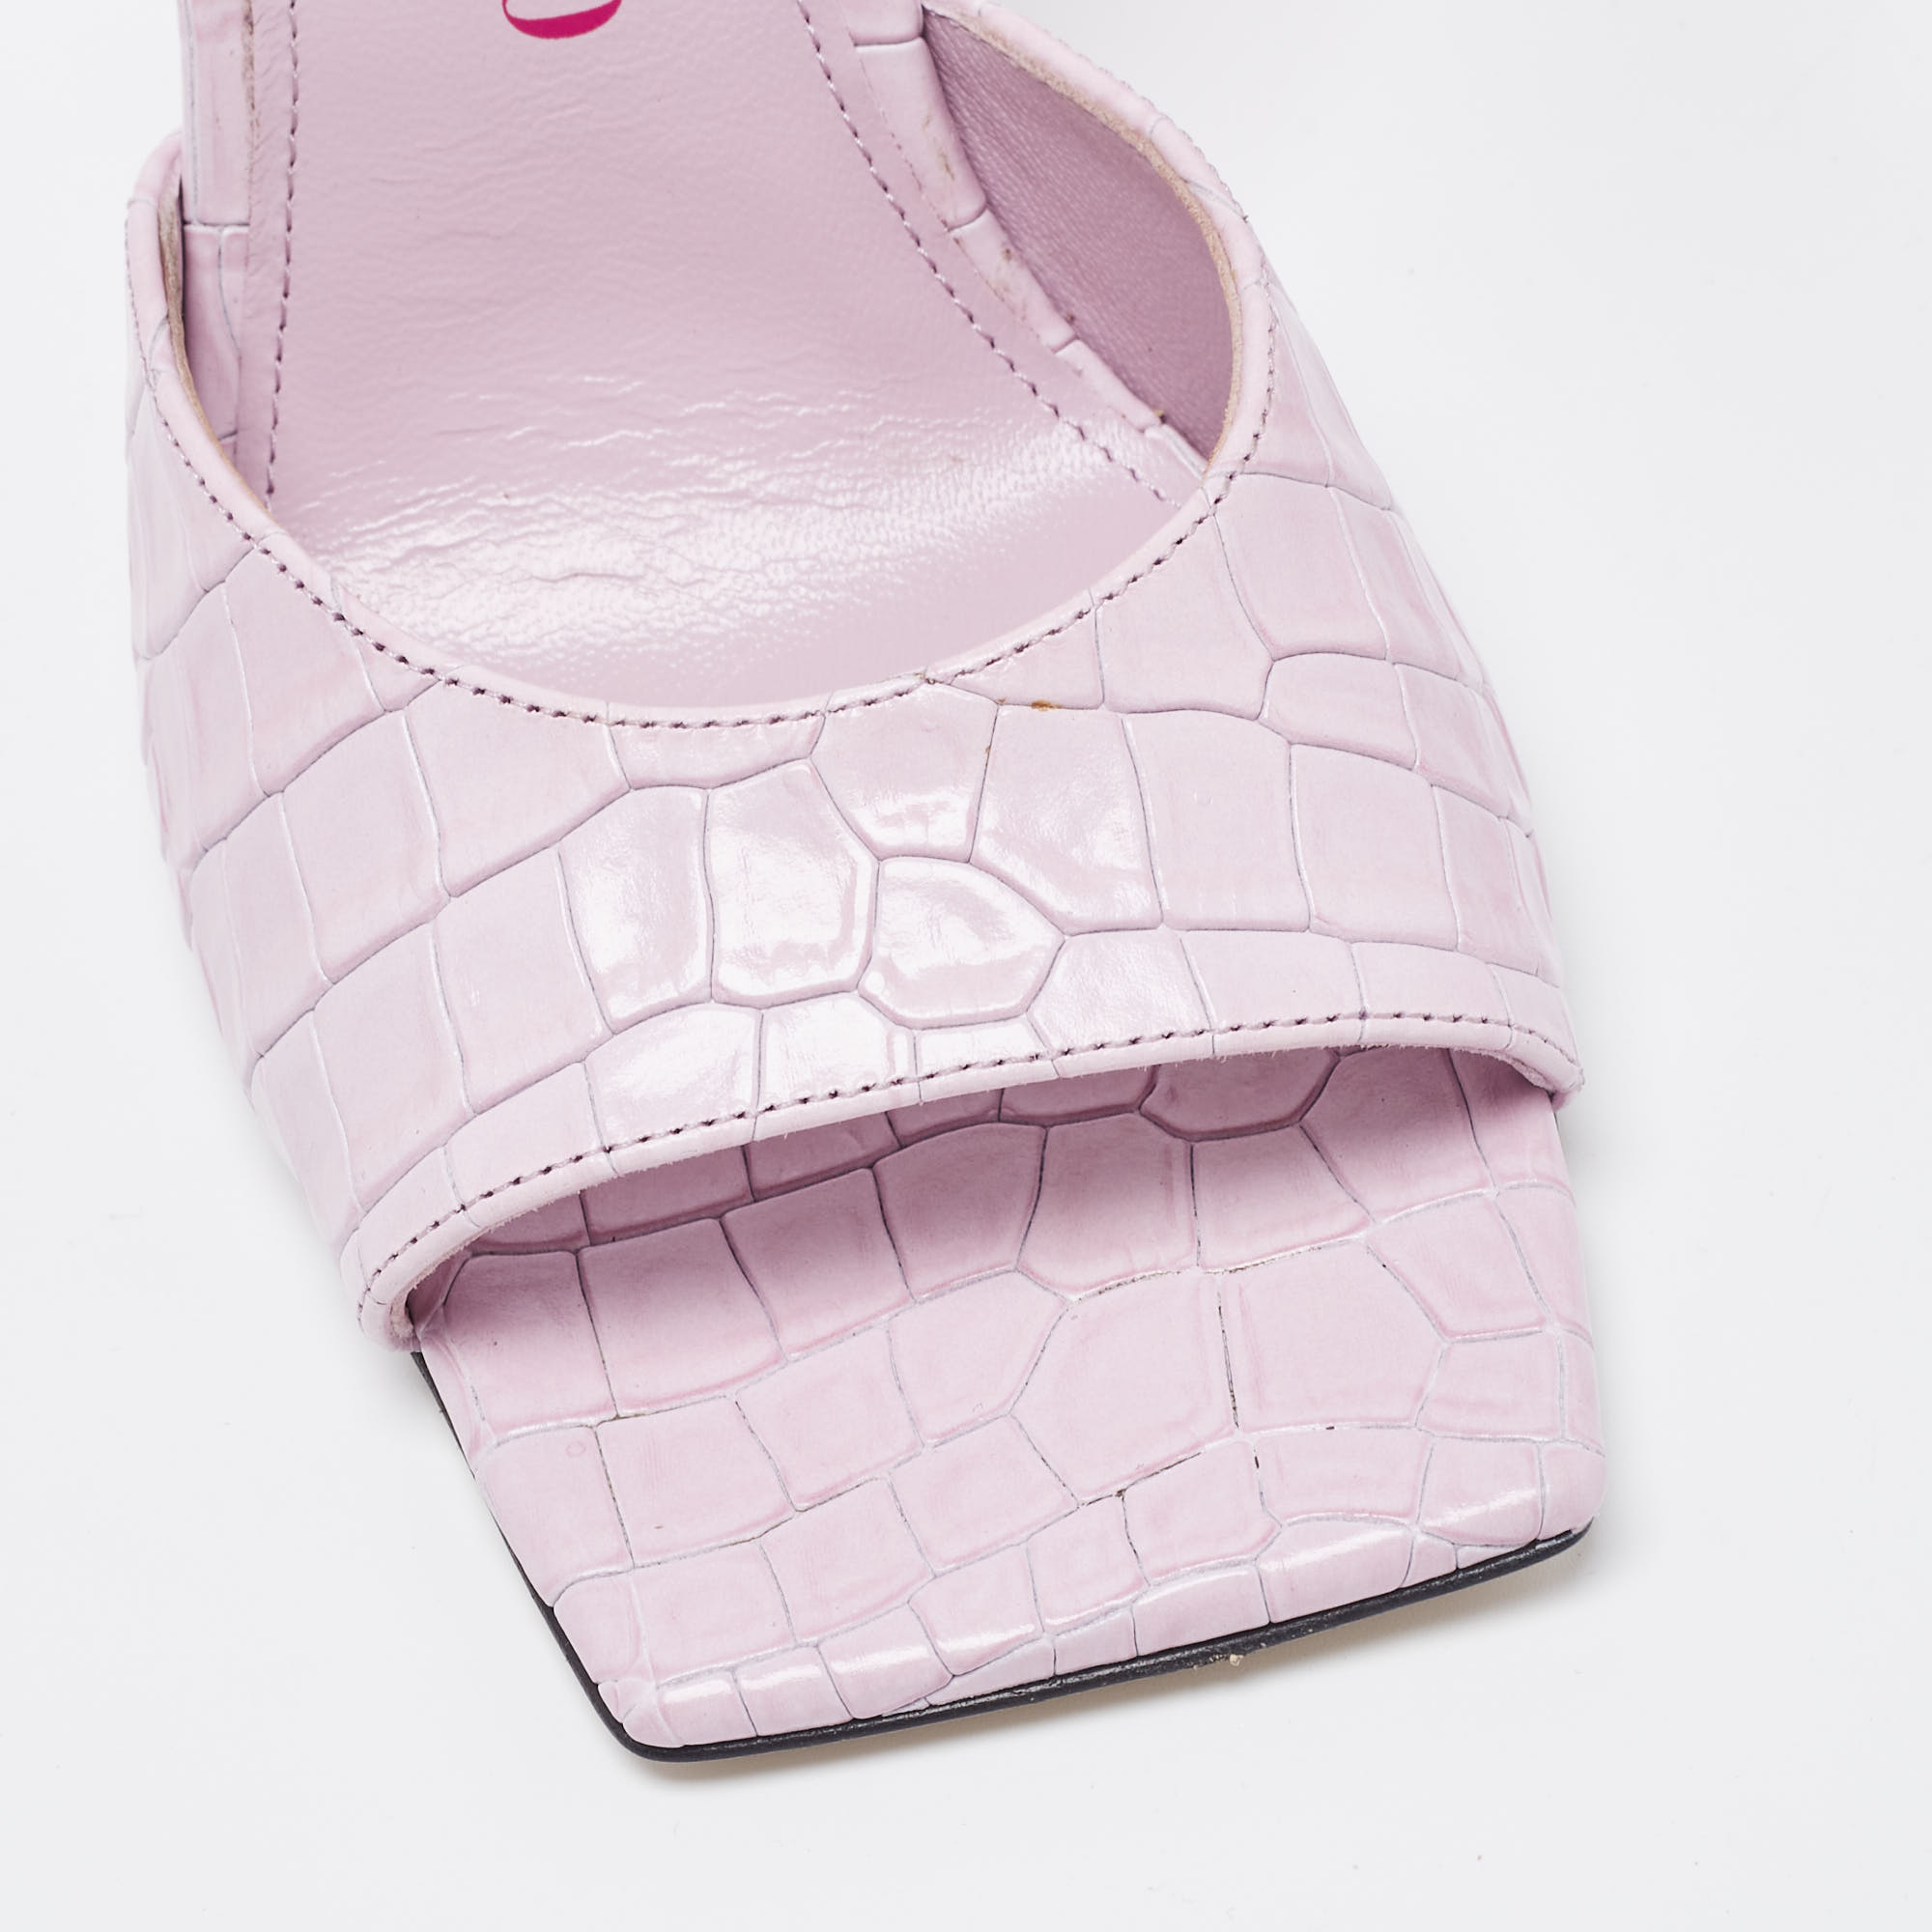 The Attico Pastel Pink Croc Embossed Leather Slide Sandals Size 37